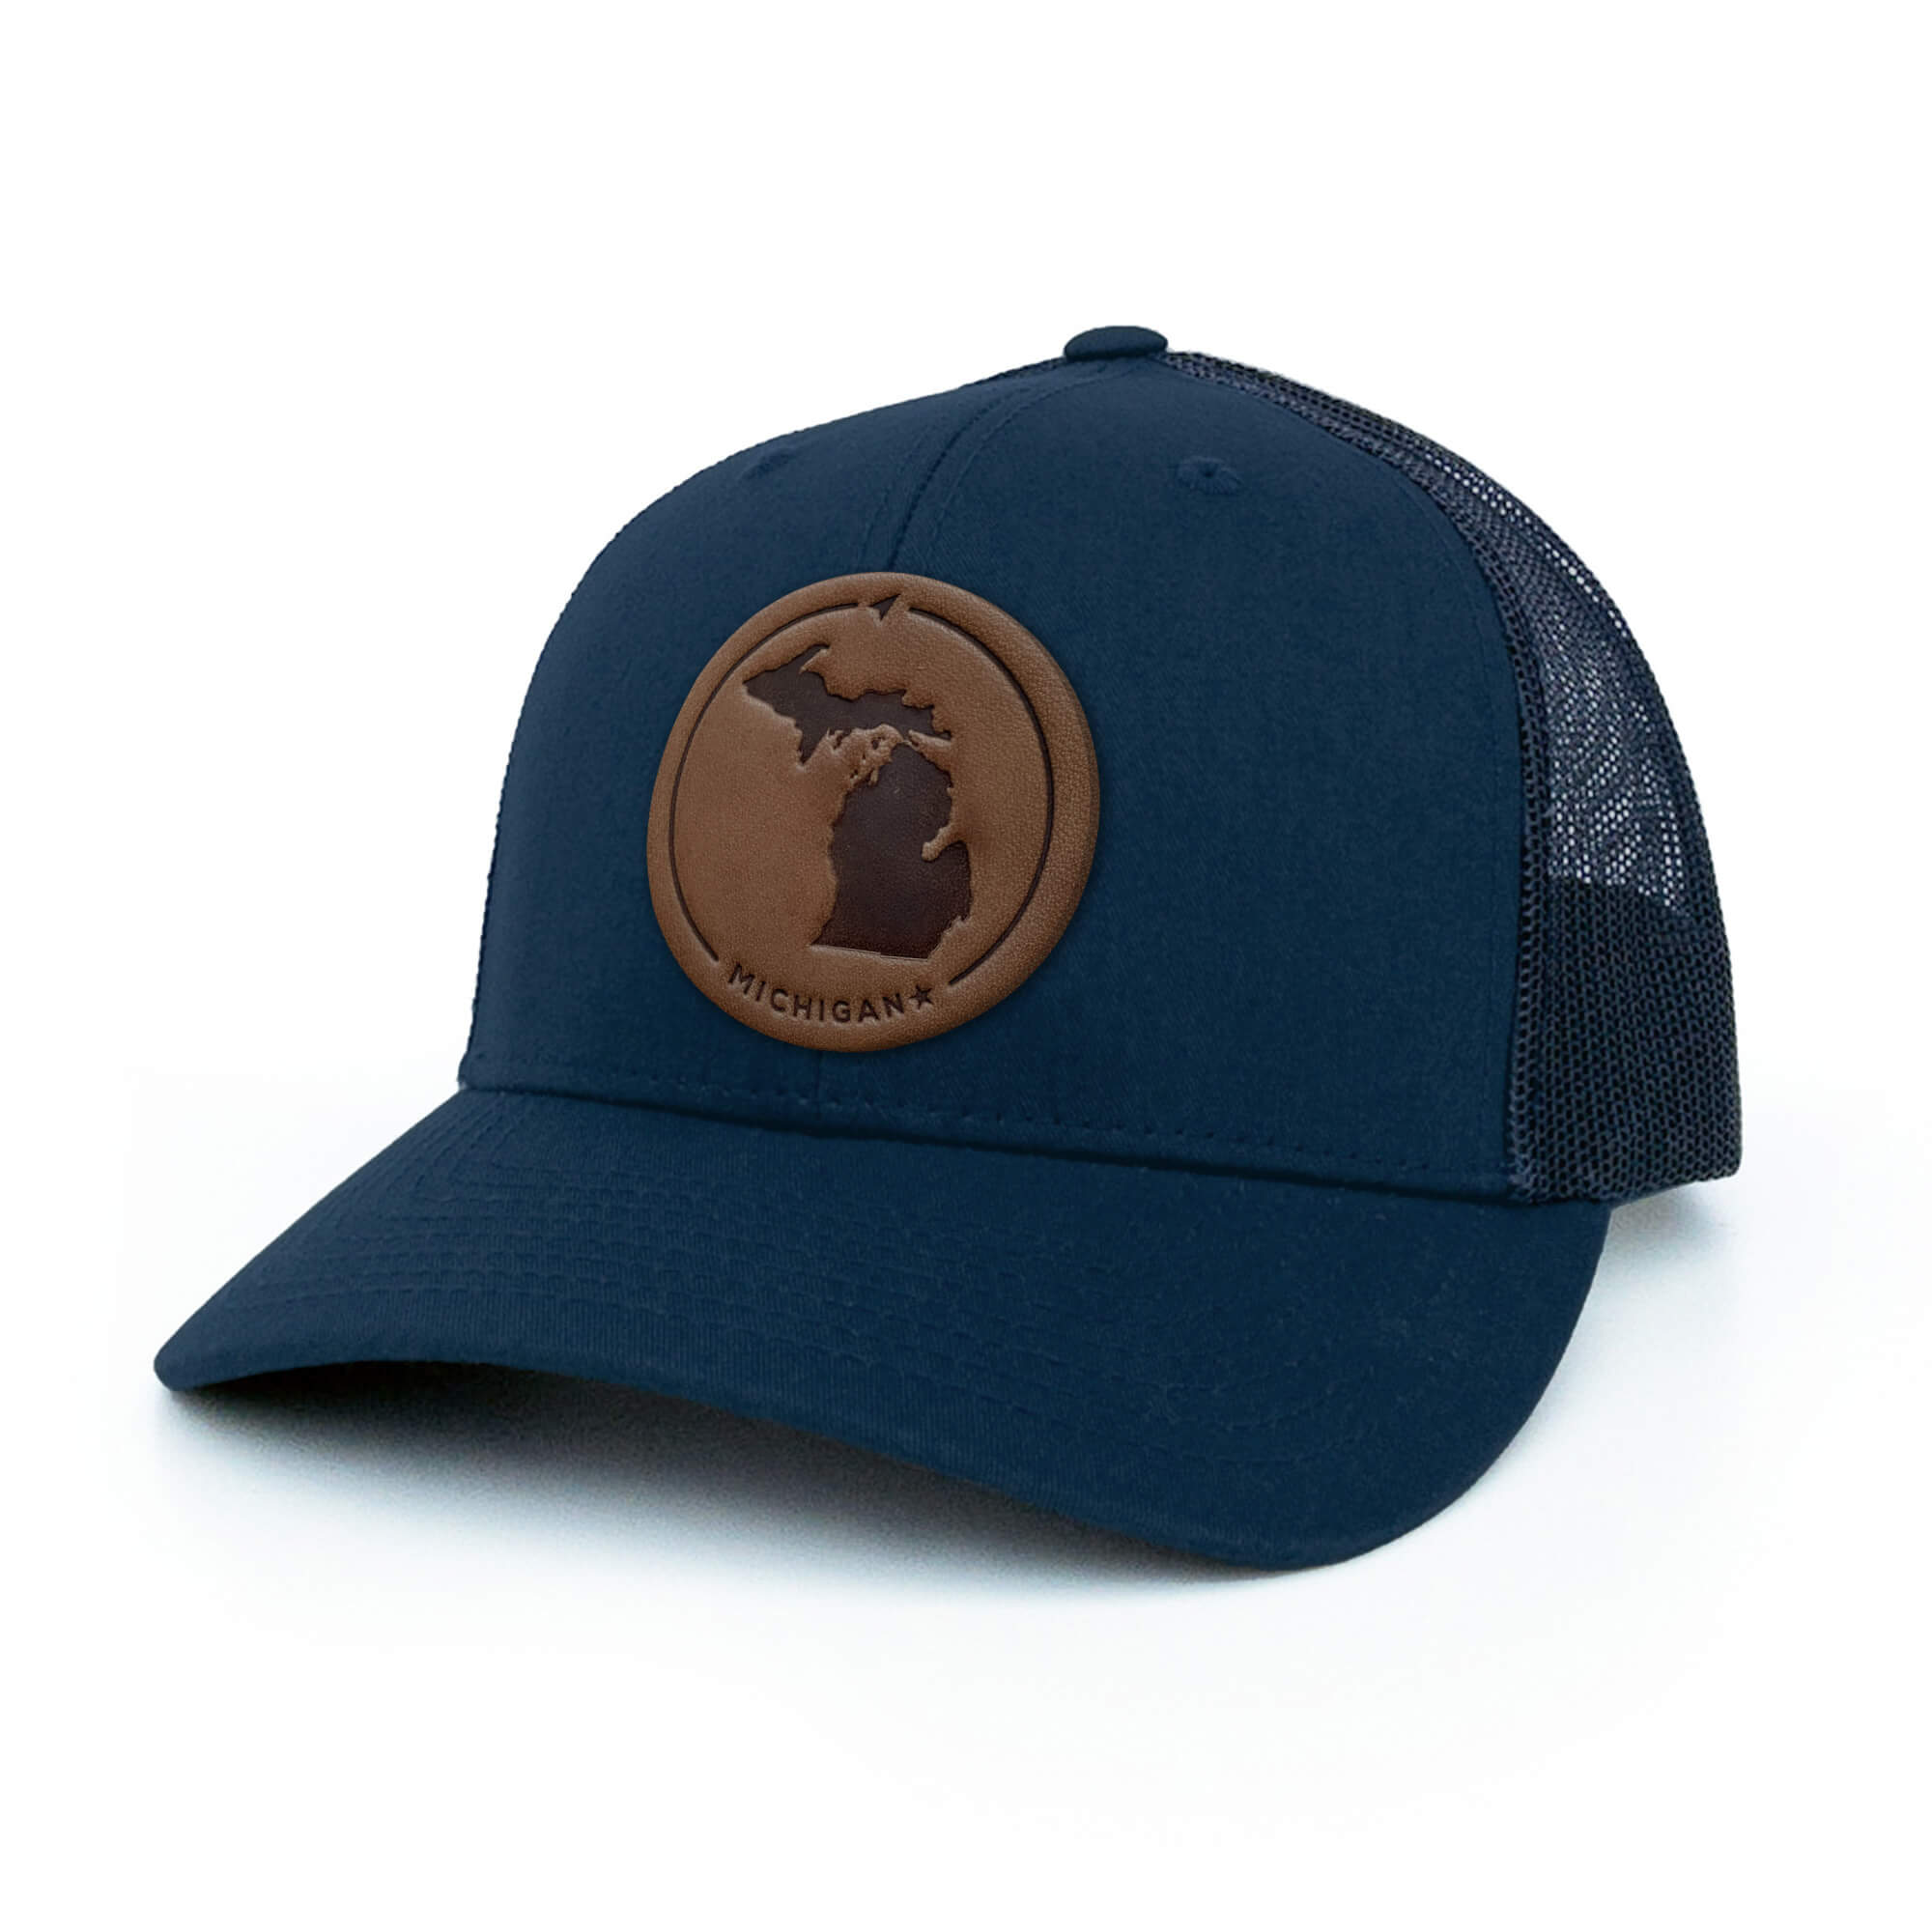 Navy trucker hat with full-grain leather patch of a Michigan | BLACK-003-007, CHARC-003-007, NAVY-003-007, HGREY-003-007, MOSS-003-007, BROWN-003-007